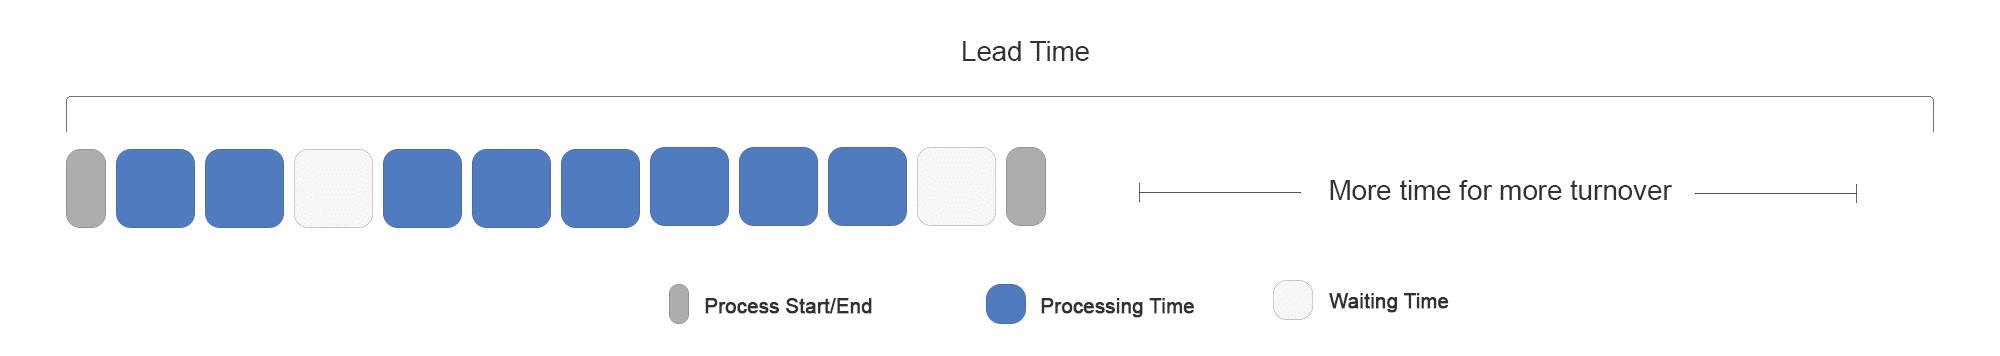 Optimized lead time shown on an example from start to finish with processing time and waiting time. The additional time is represented with more turnover.